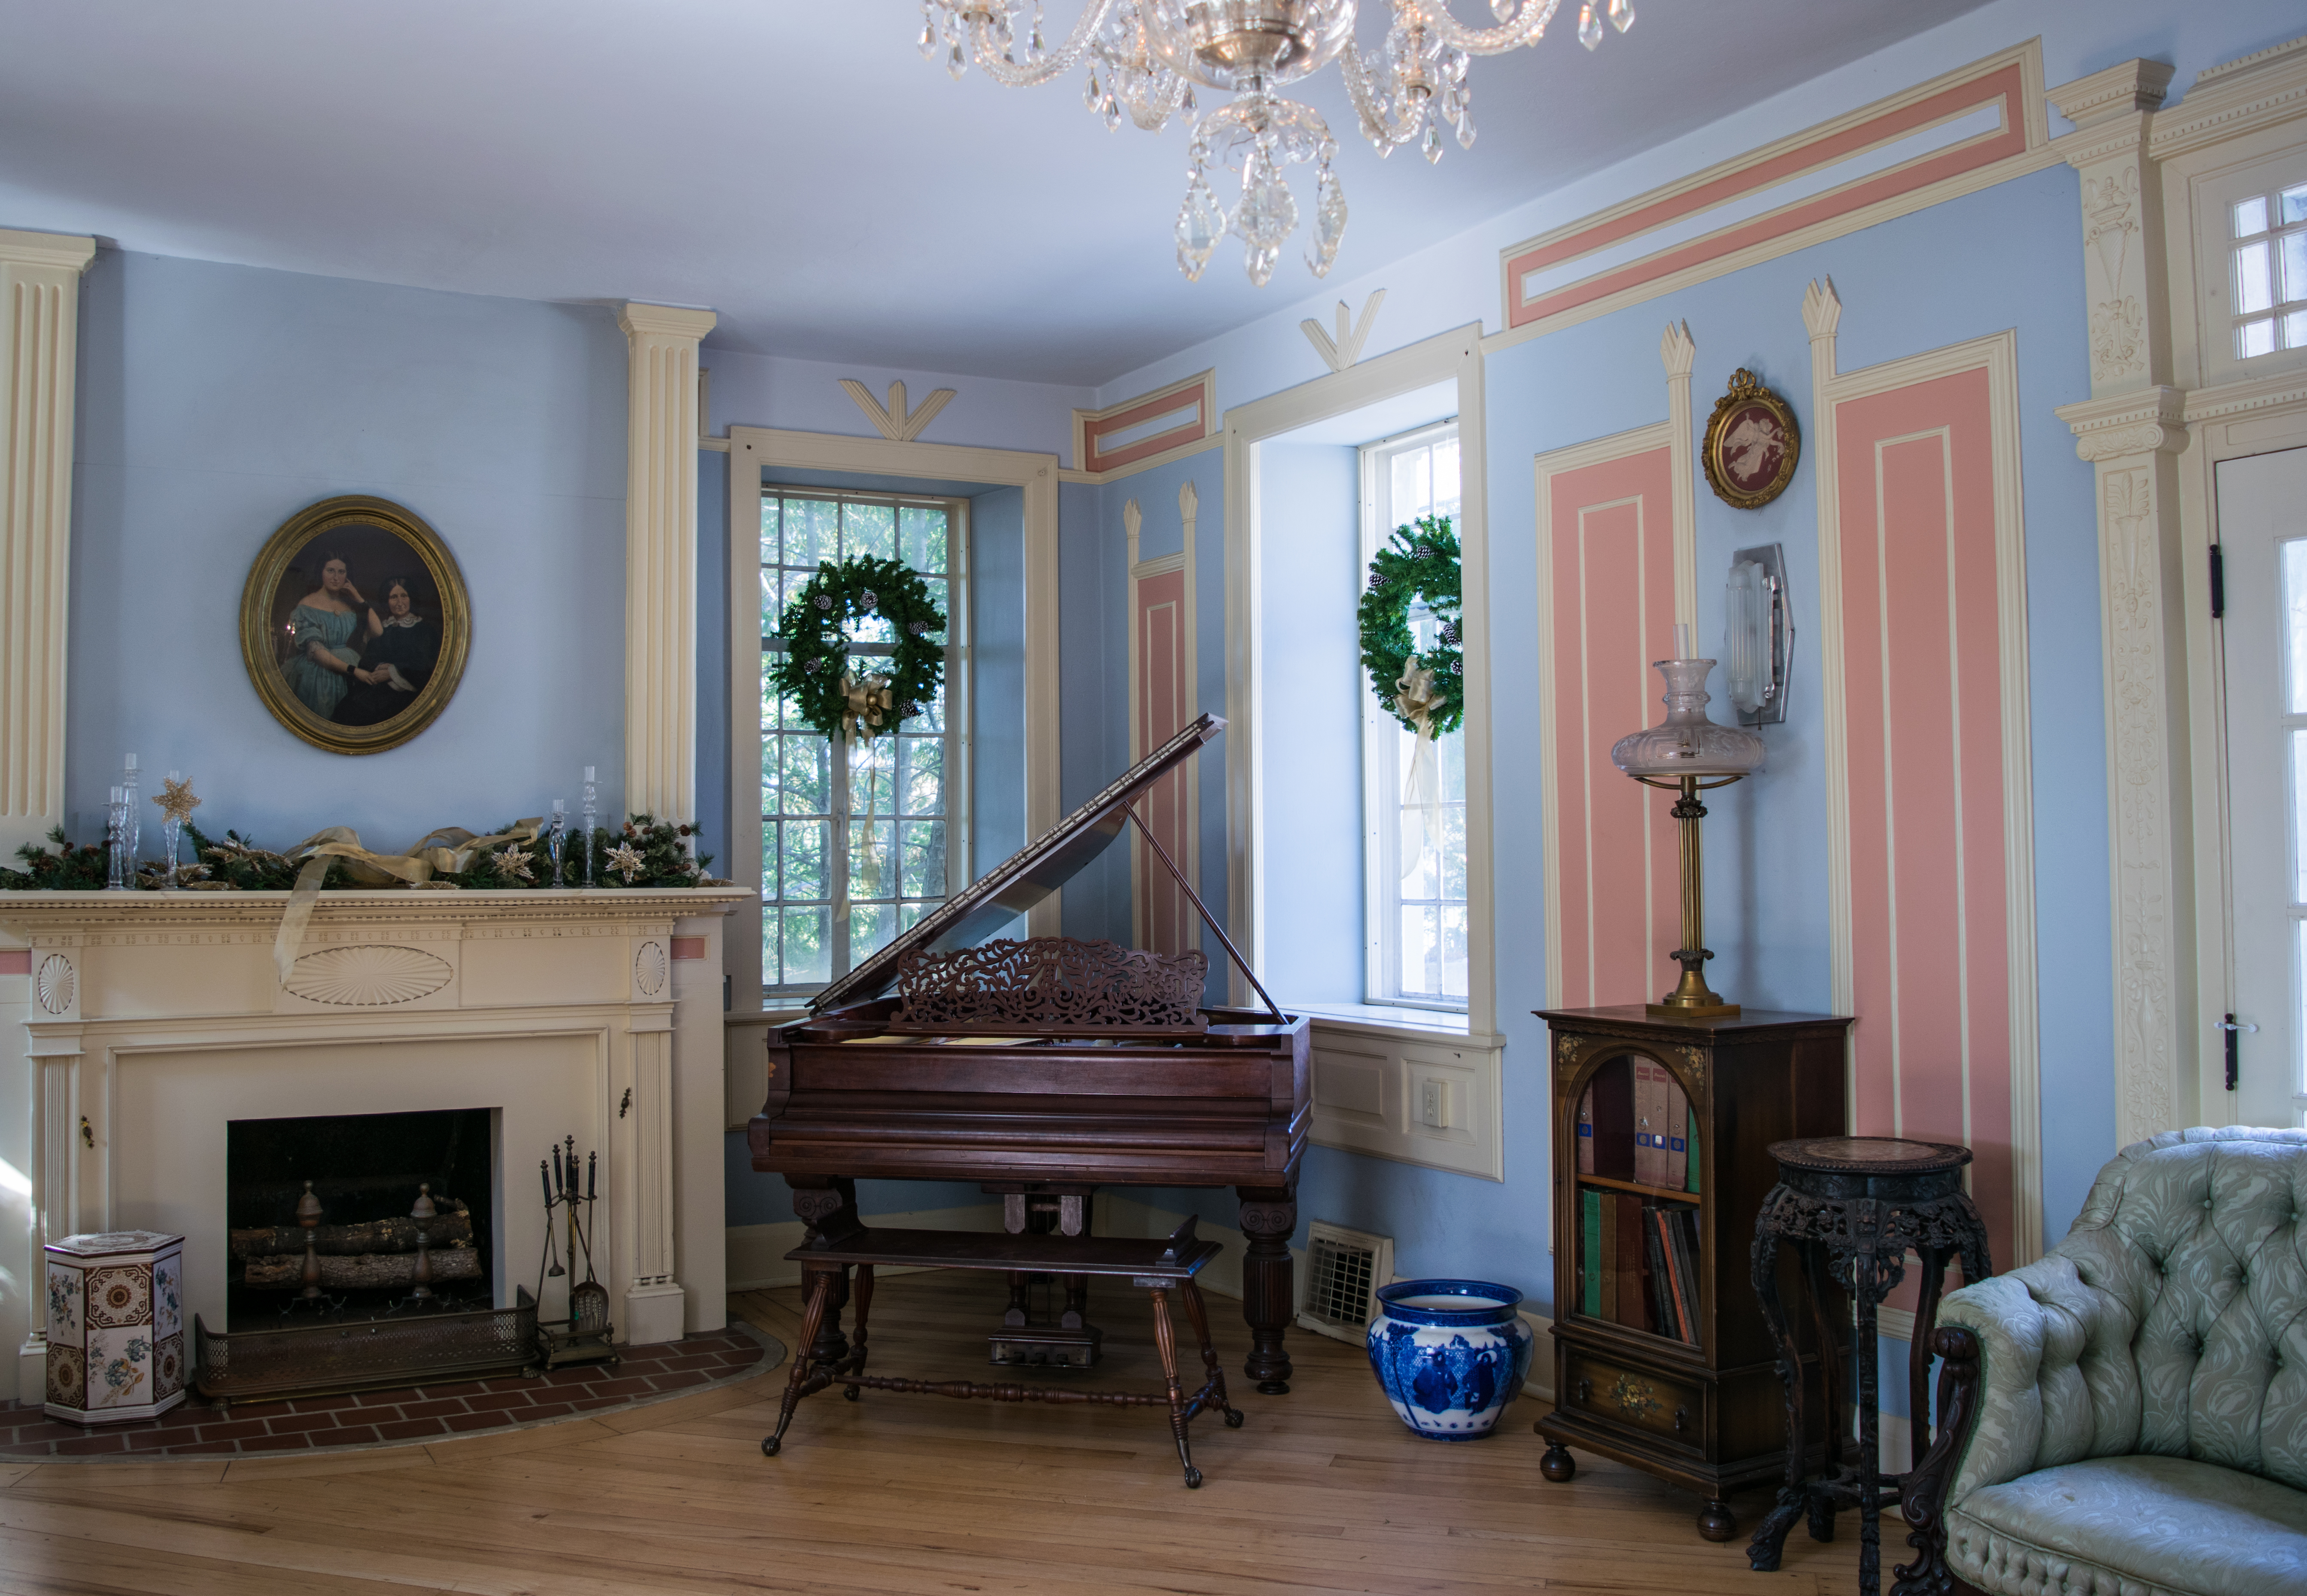 Interior of Burritt Mansion, designed in X-shape with tall windows